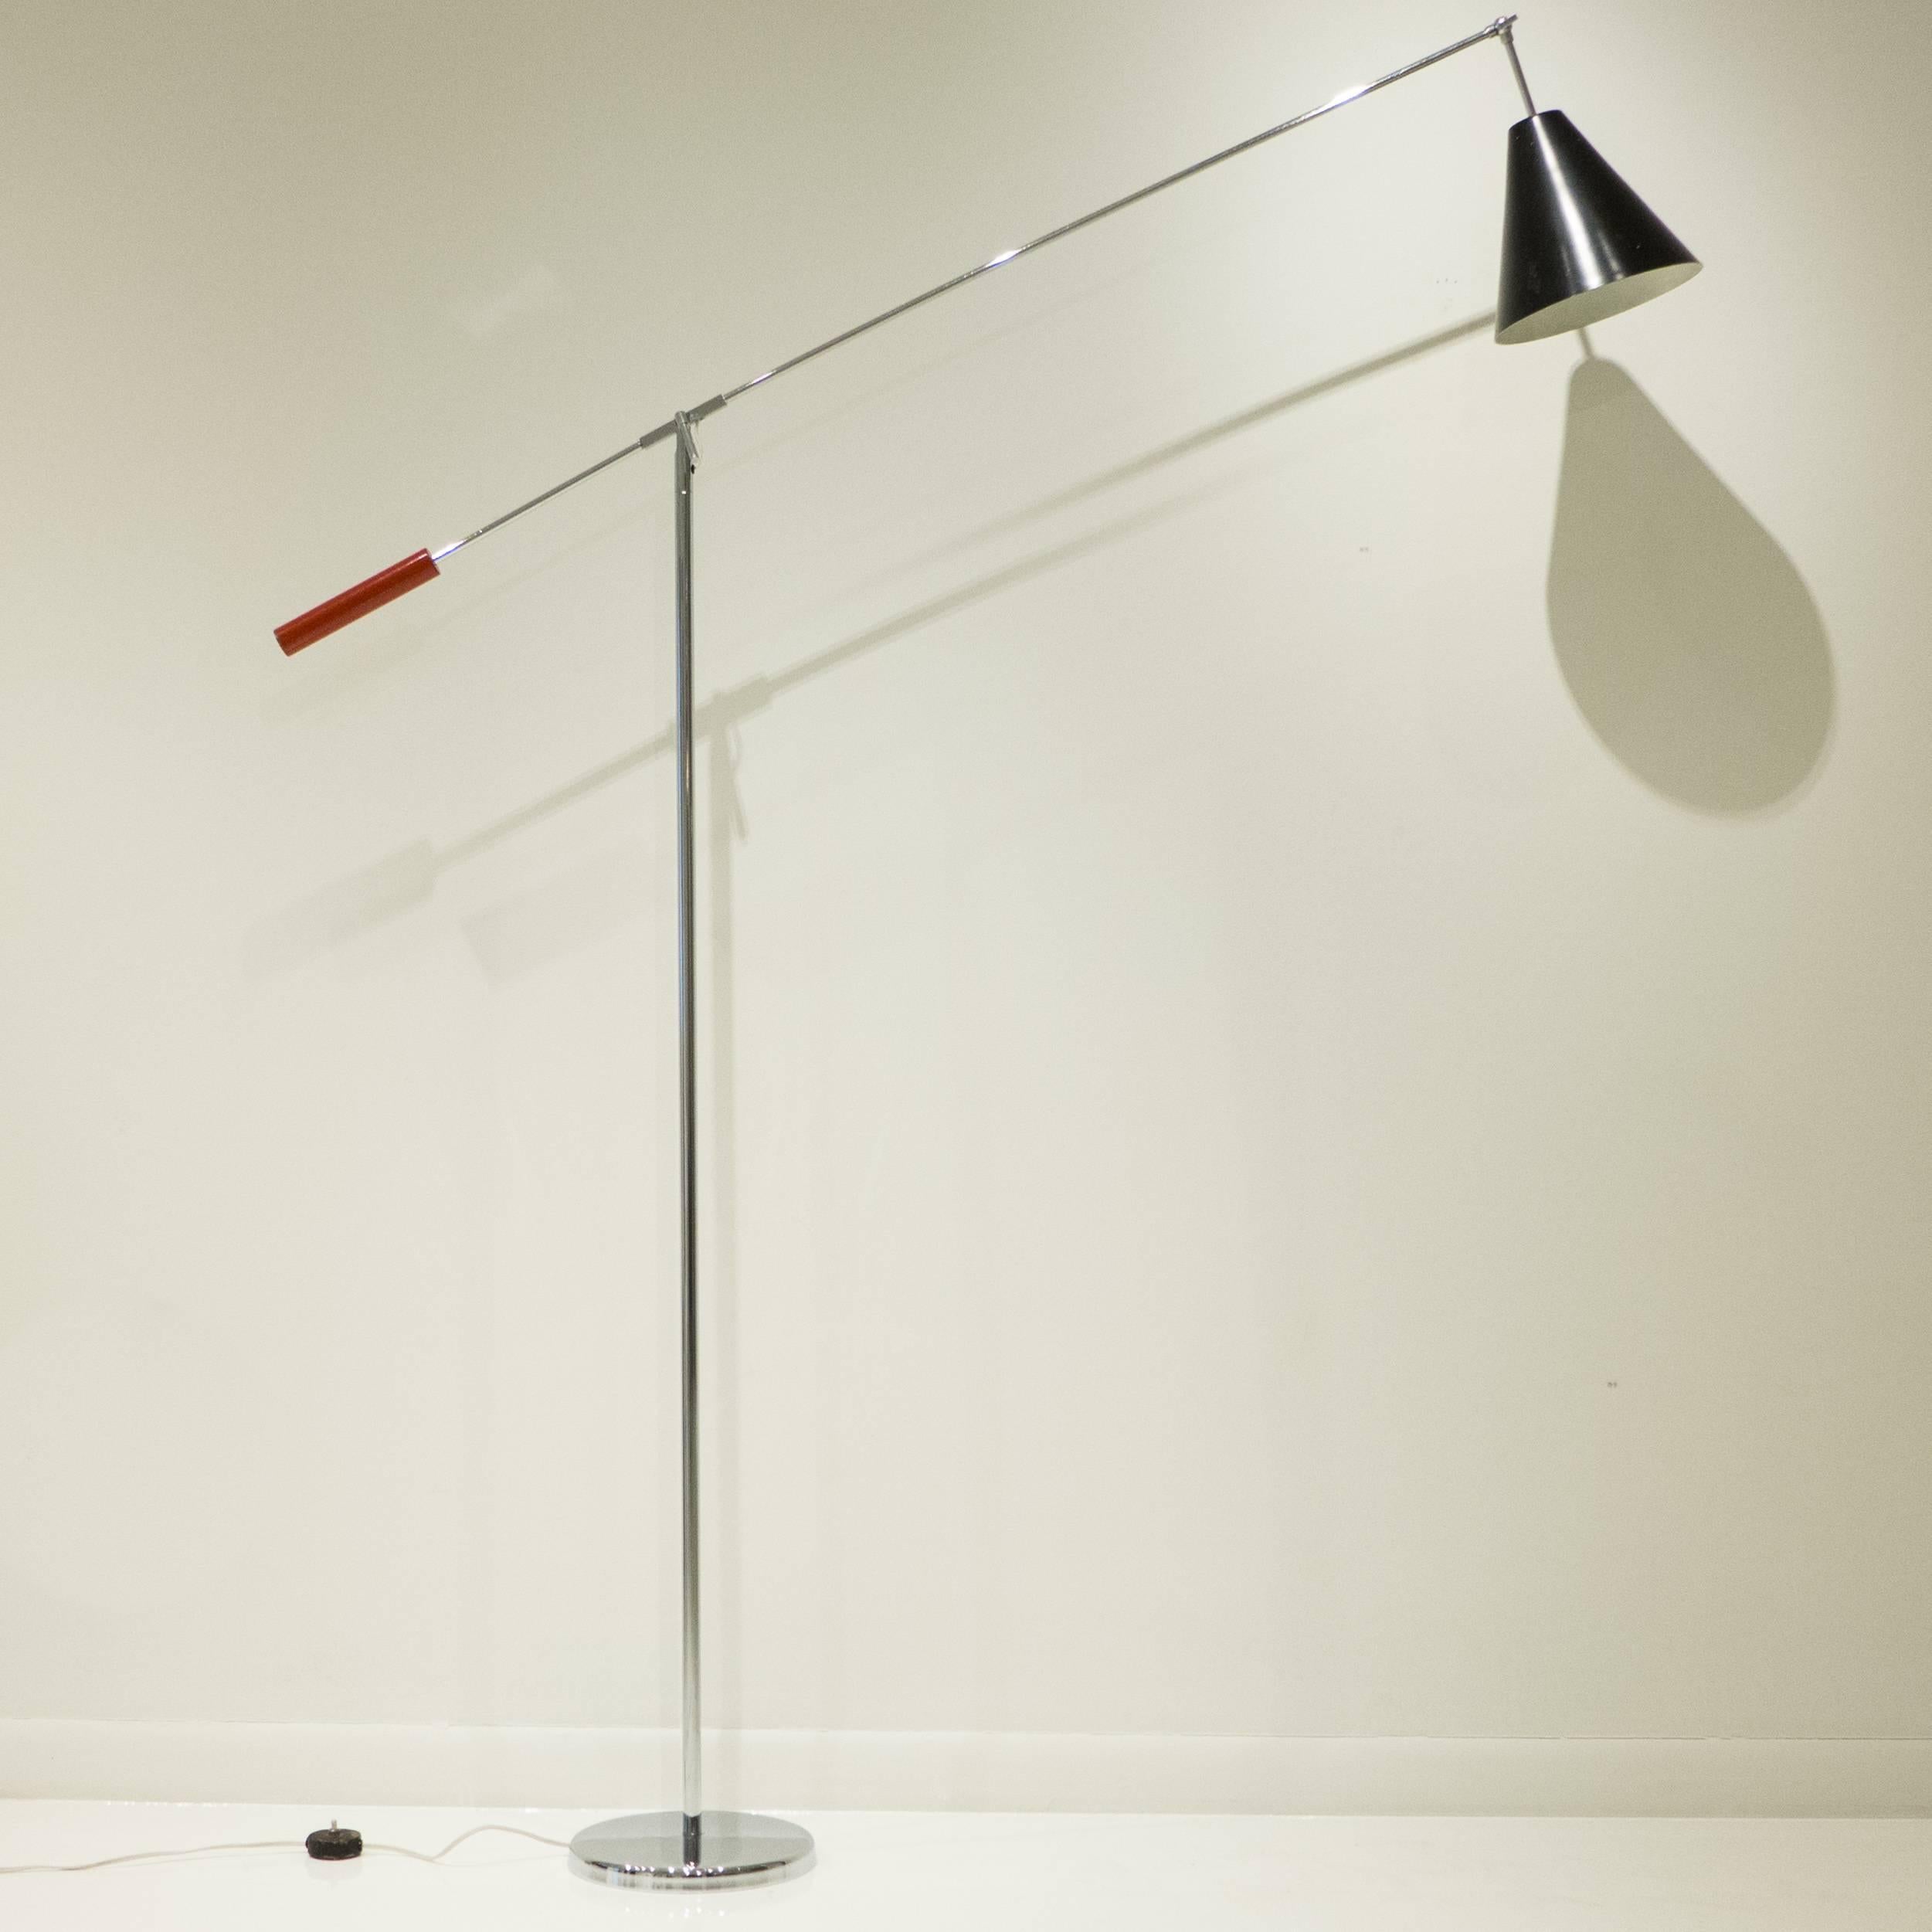 Single-arm, adjustable floor lamp of steel and chromed tubular steel, with lacquered black and red accents on the conical visor and counterweight, respectively. A Minimalist version of the iconic Triennale lamp, with a wingspan of 59